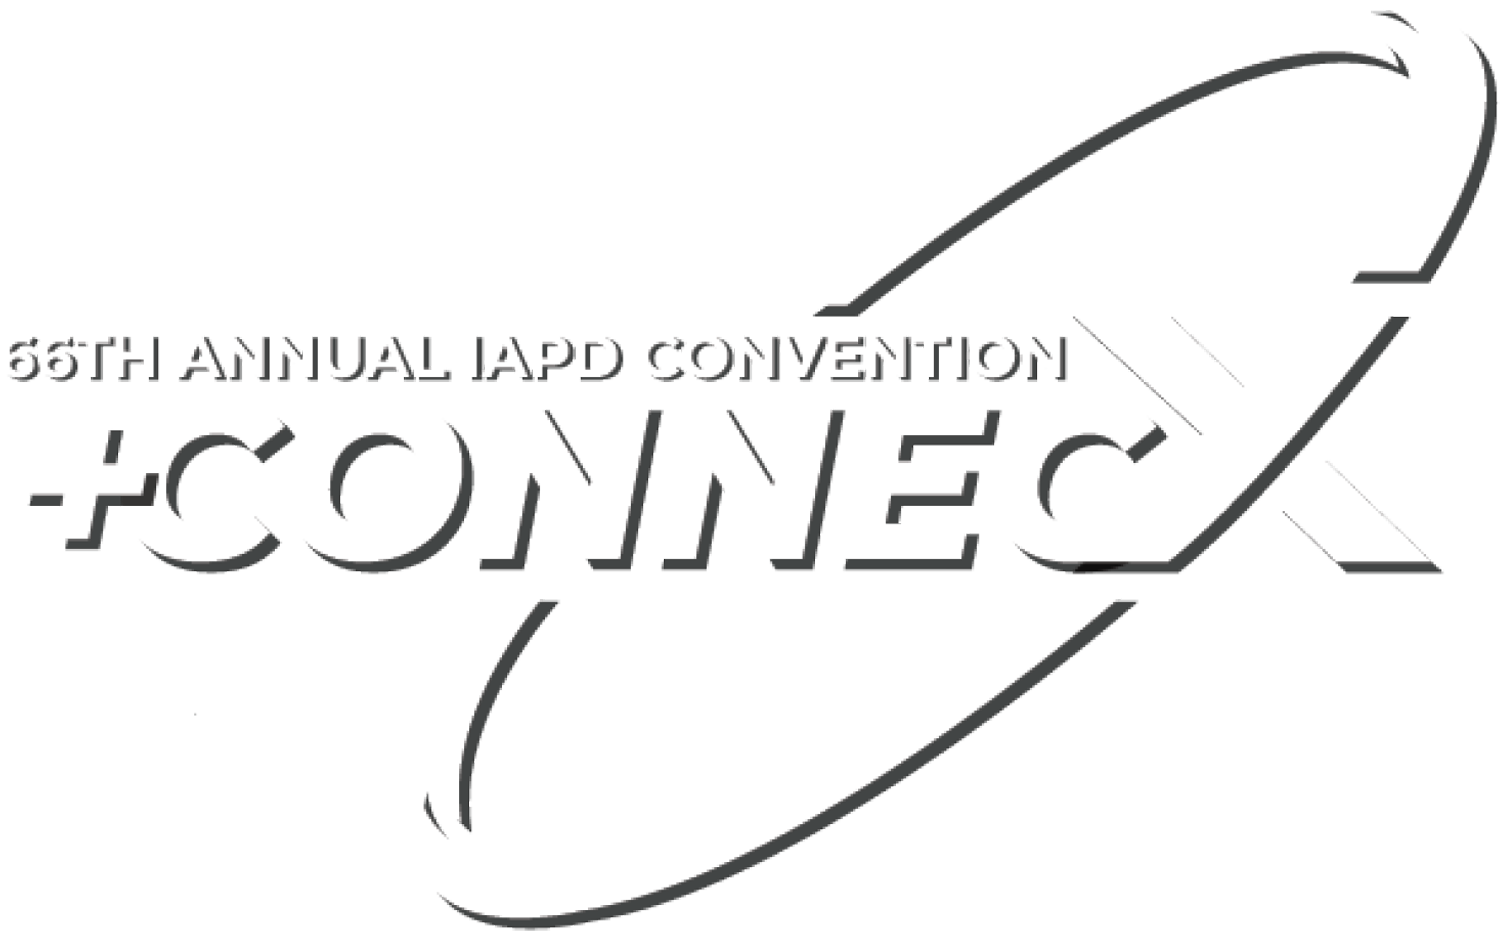 66TH Annual IAPD Convention +CONNECX typography